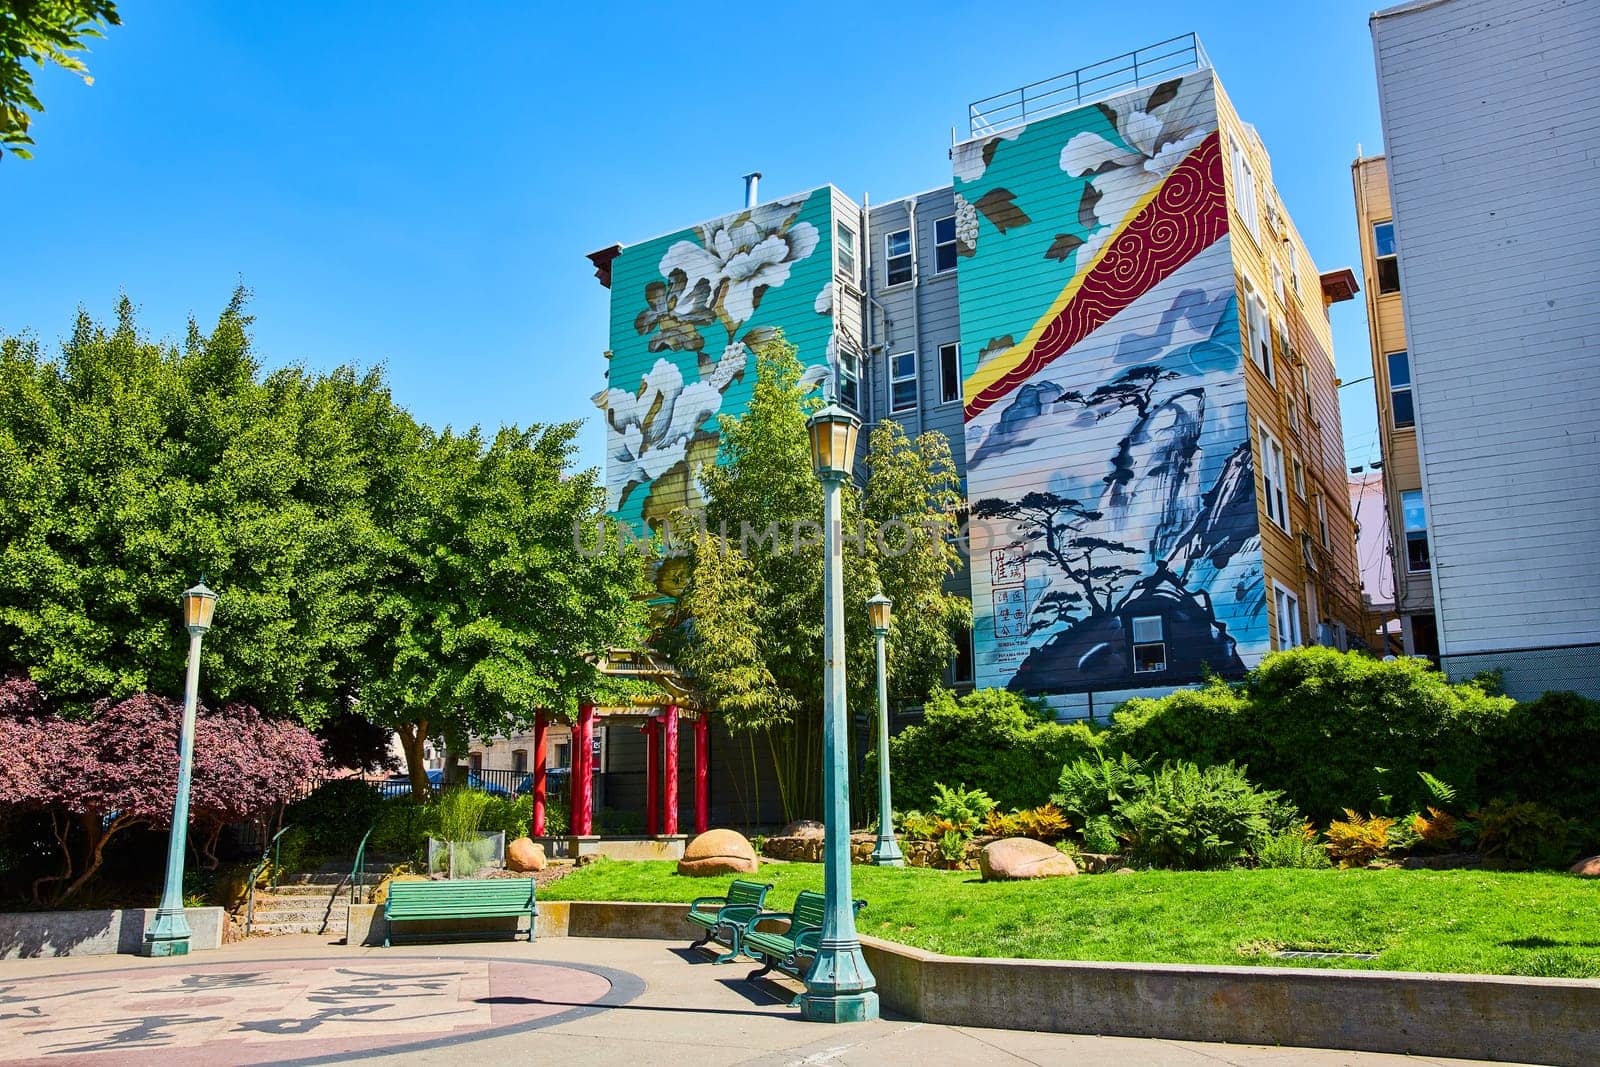 Image of Peaceful and zen art mural on buildings overlooking sunny park with red Chinese pergola